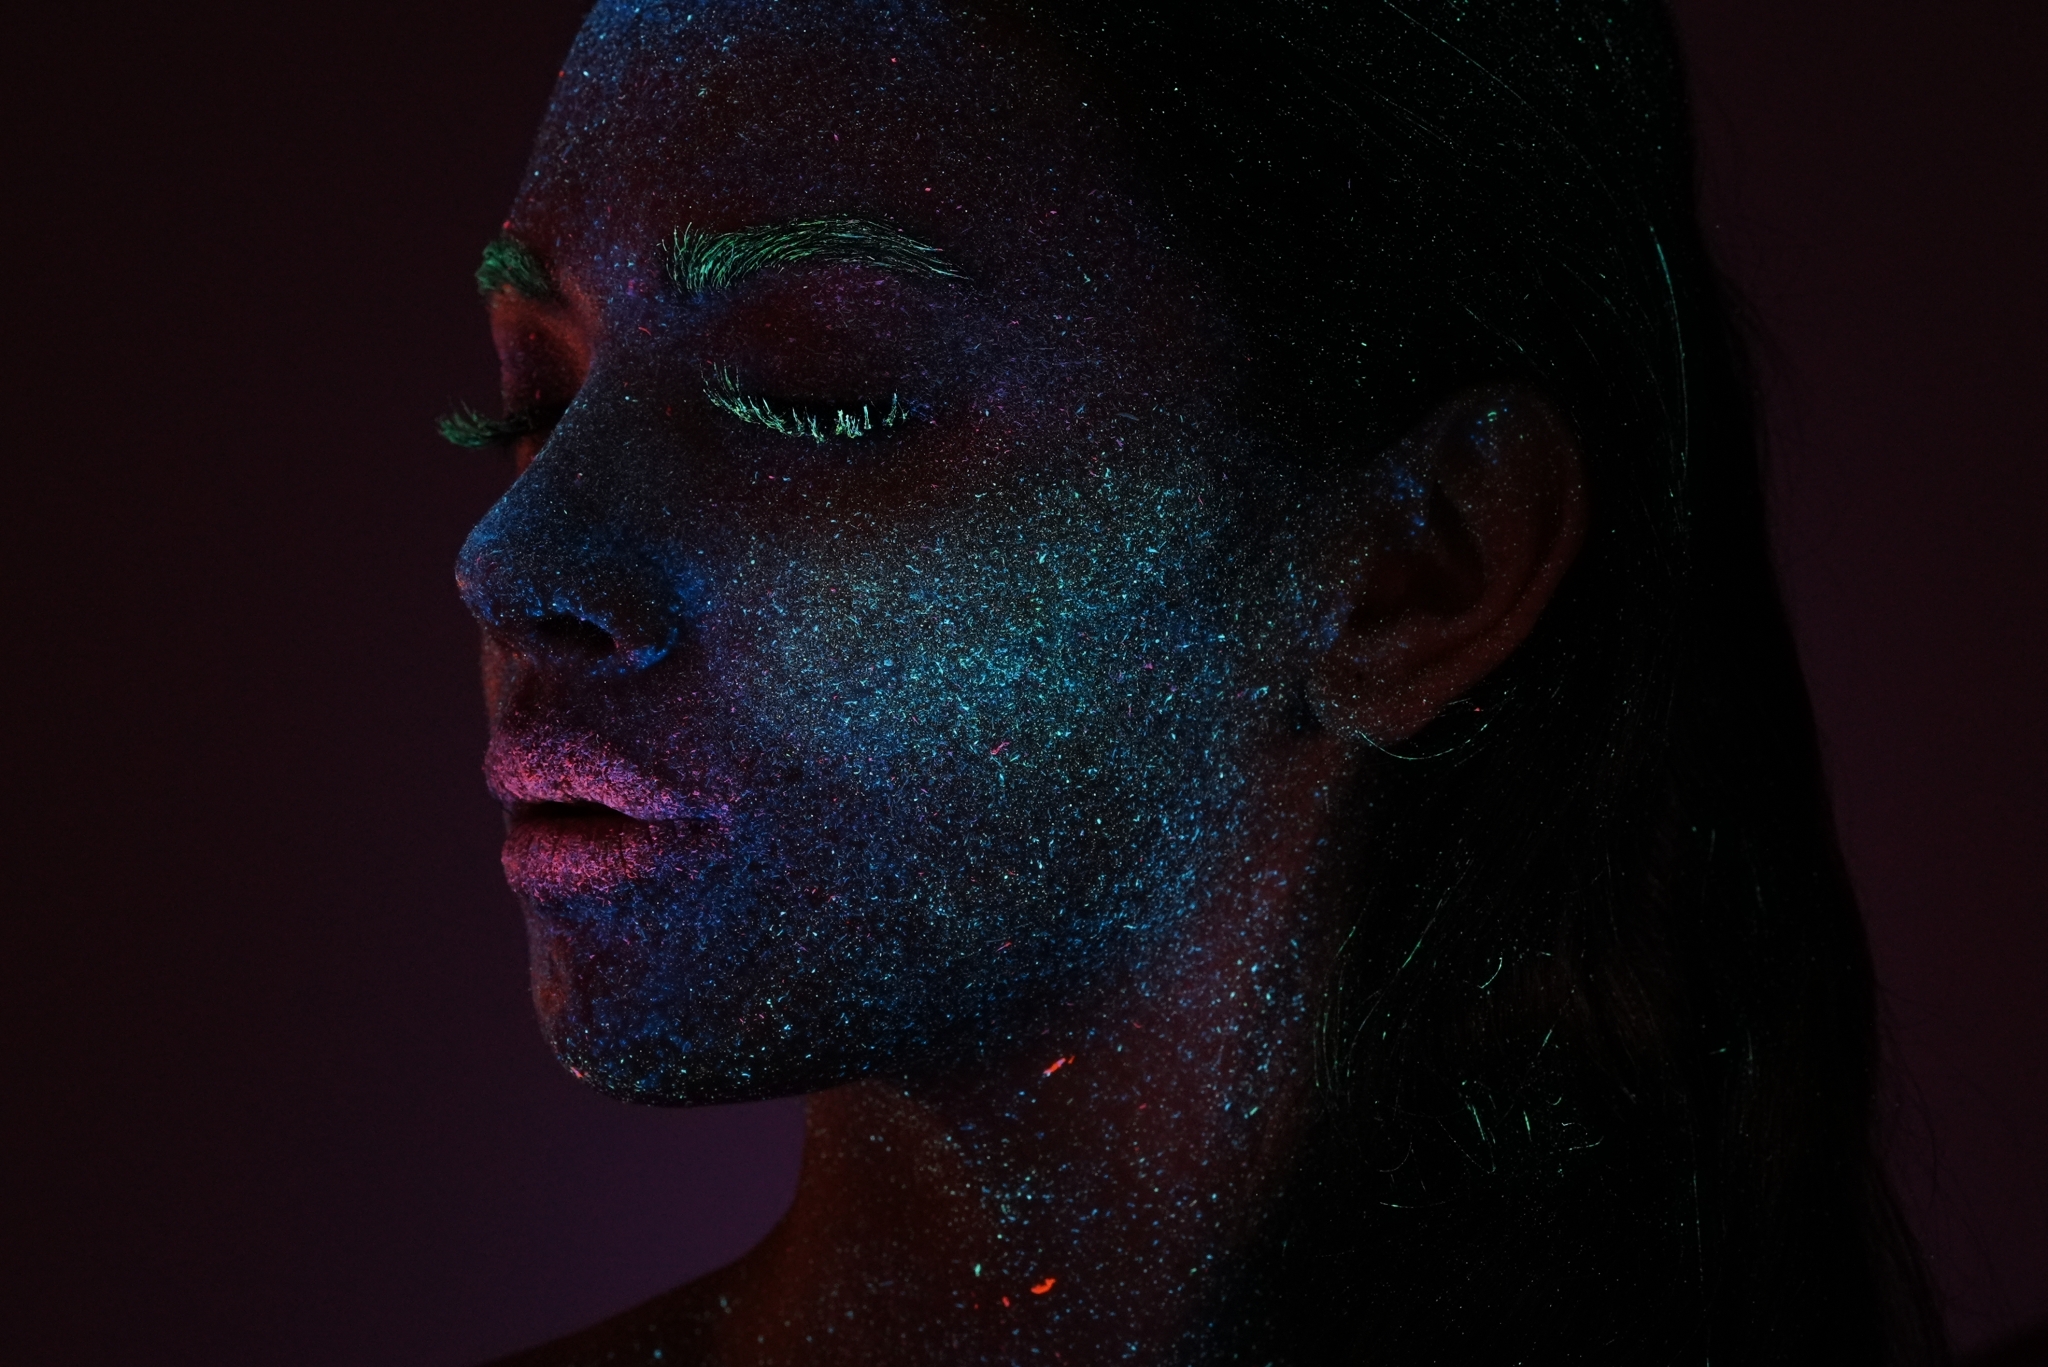 Close-up of a female face in the dark illuminated by luminescent make-up